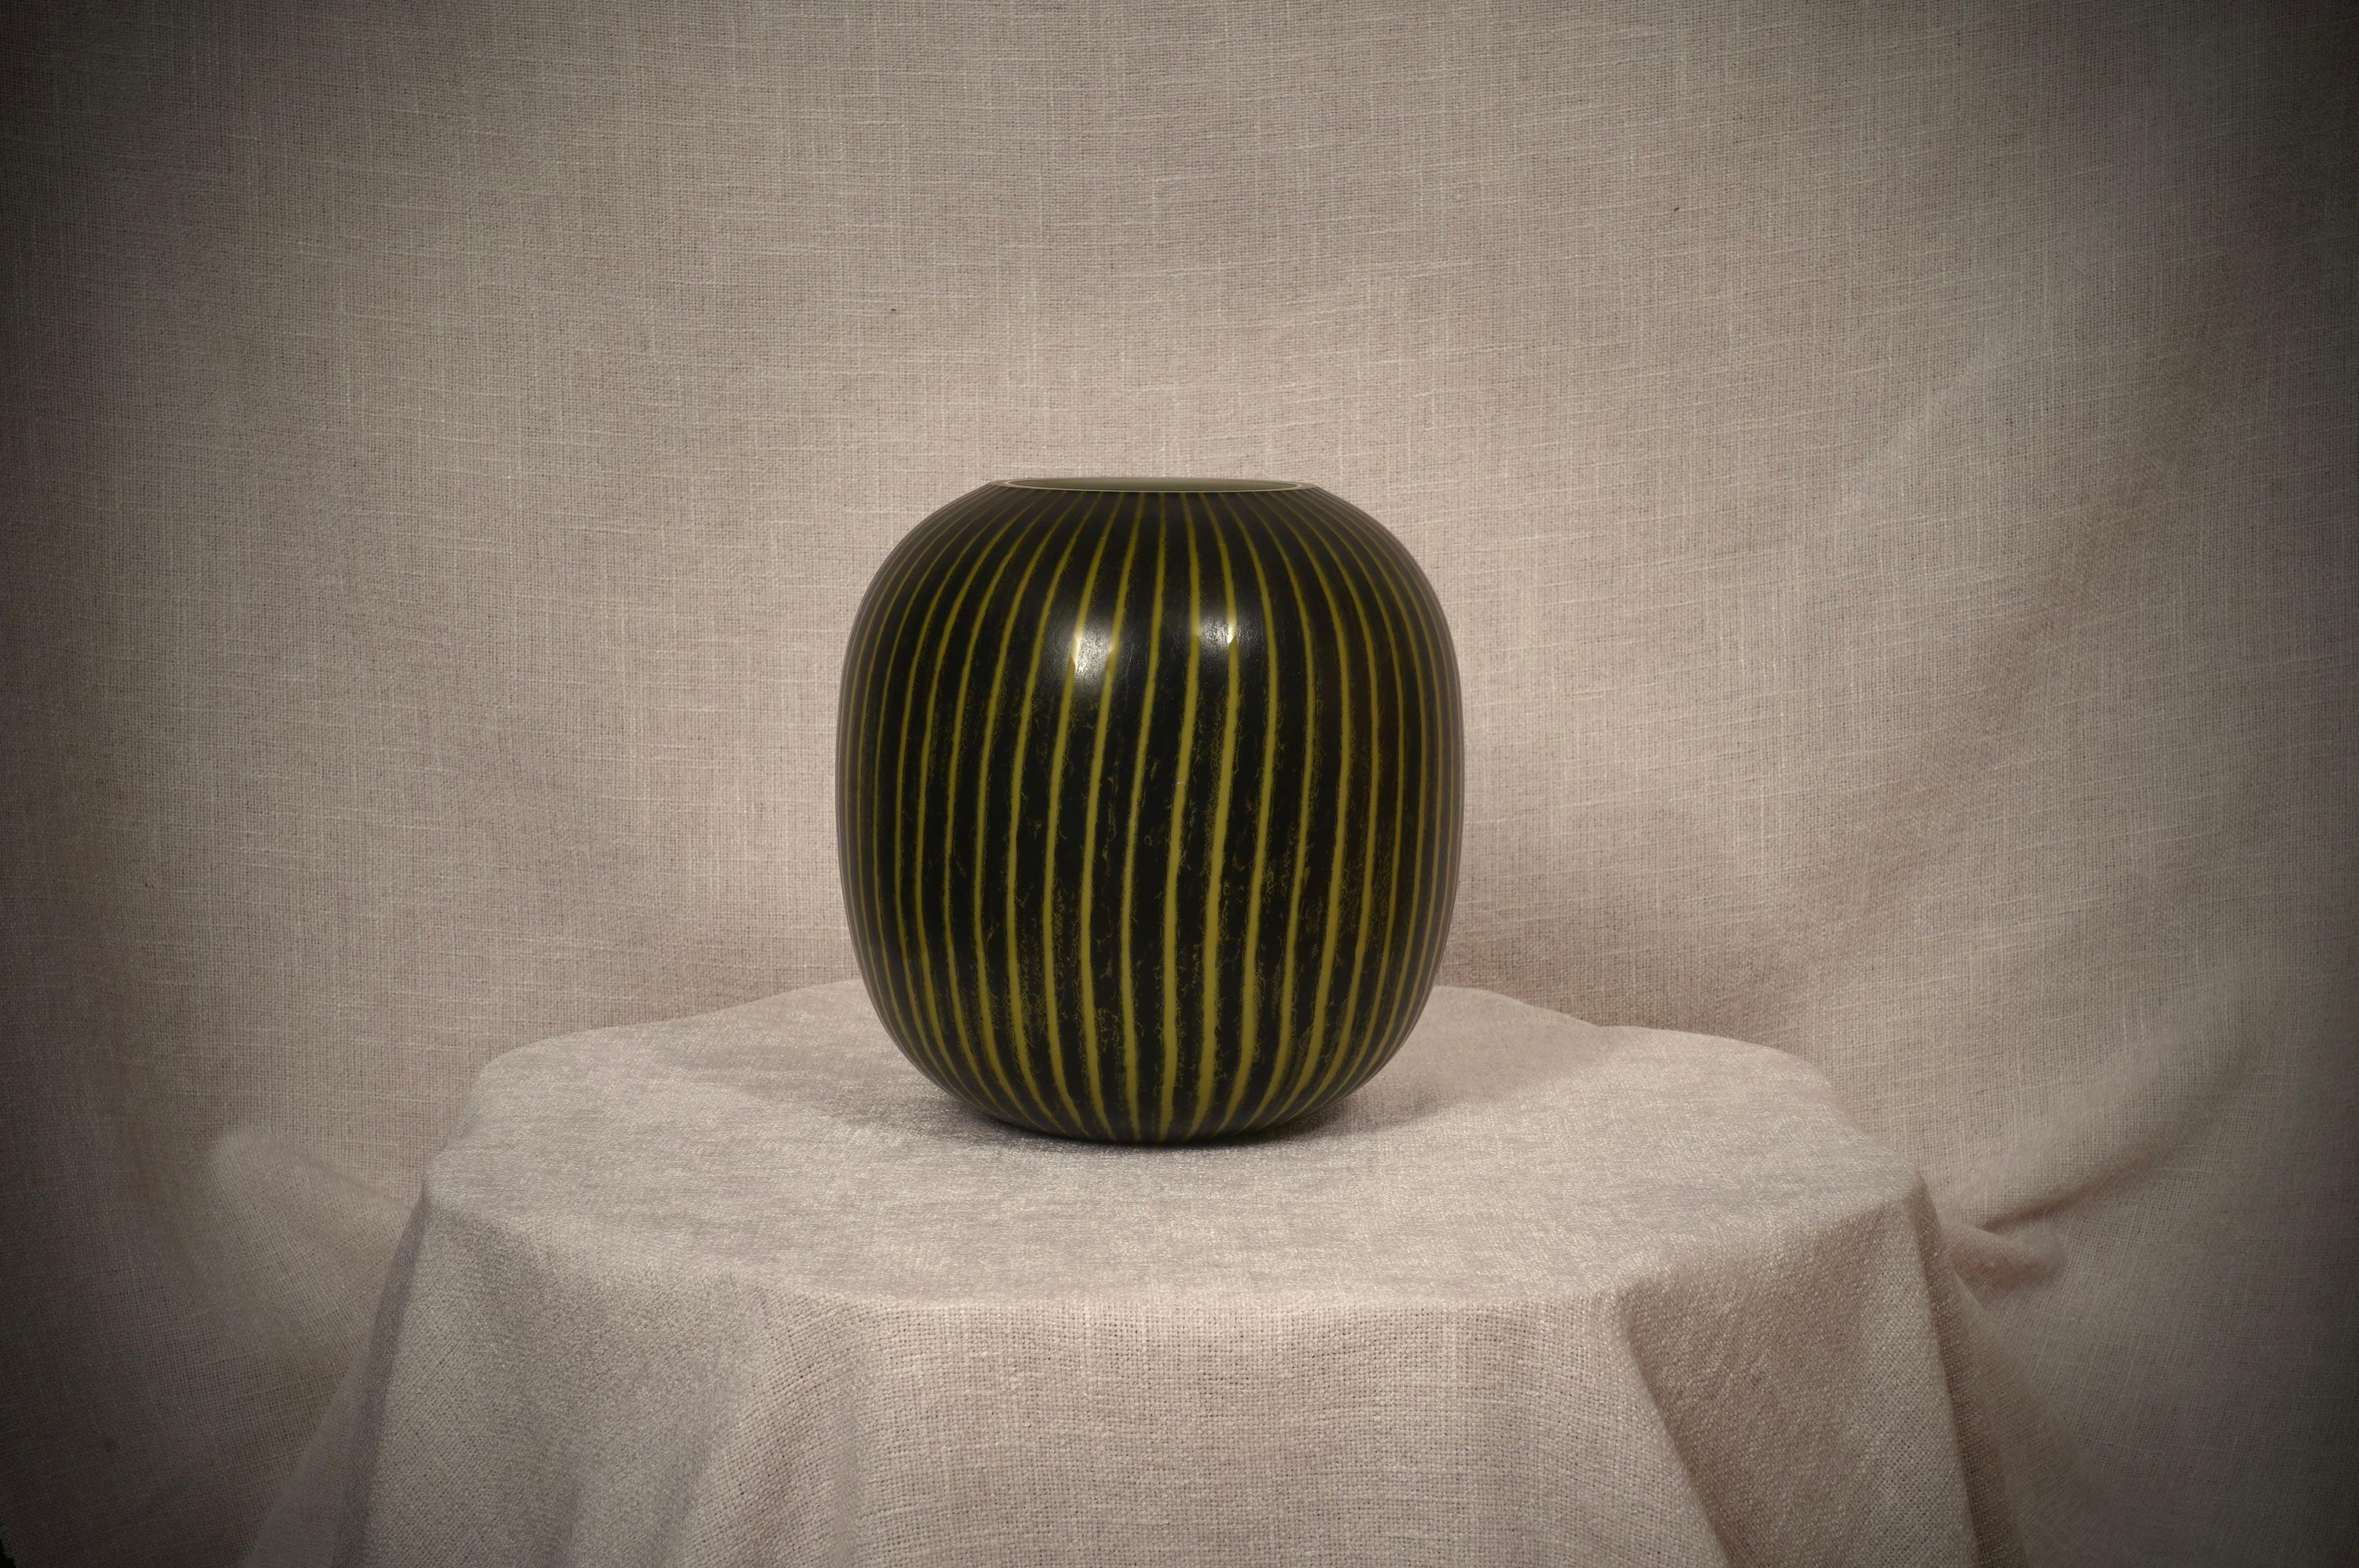 Beautiful vase from Murano manufacturing, classic amphora design. Very light, thin and delicate, with a beautiful bright yellow color that stands out on a black base.

The Murano vase, blown completely by hand, is of an unprecedented lightness;